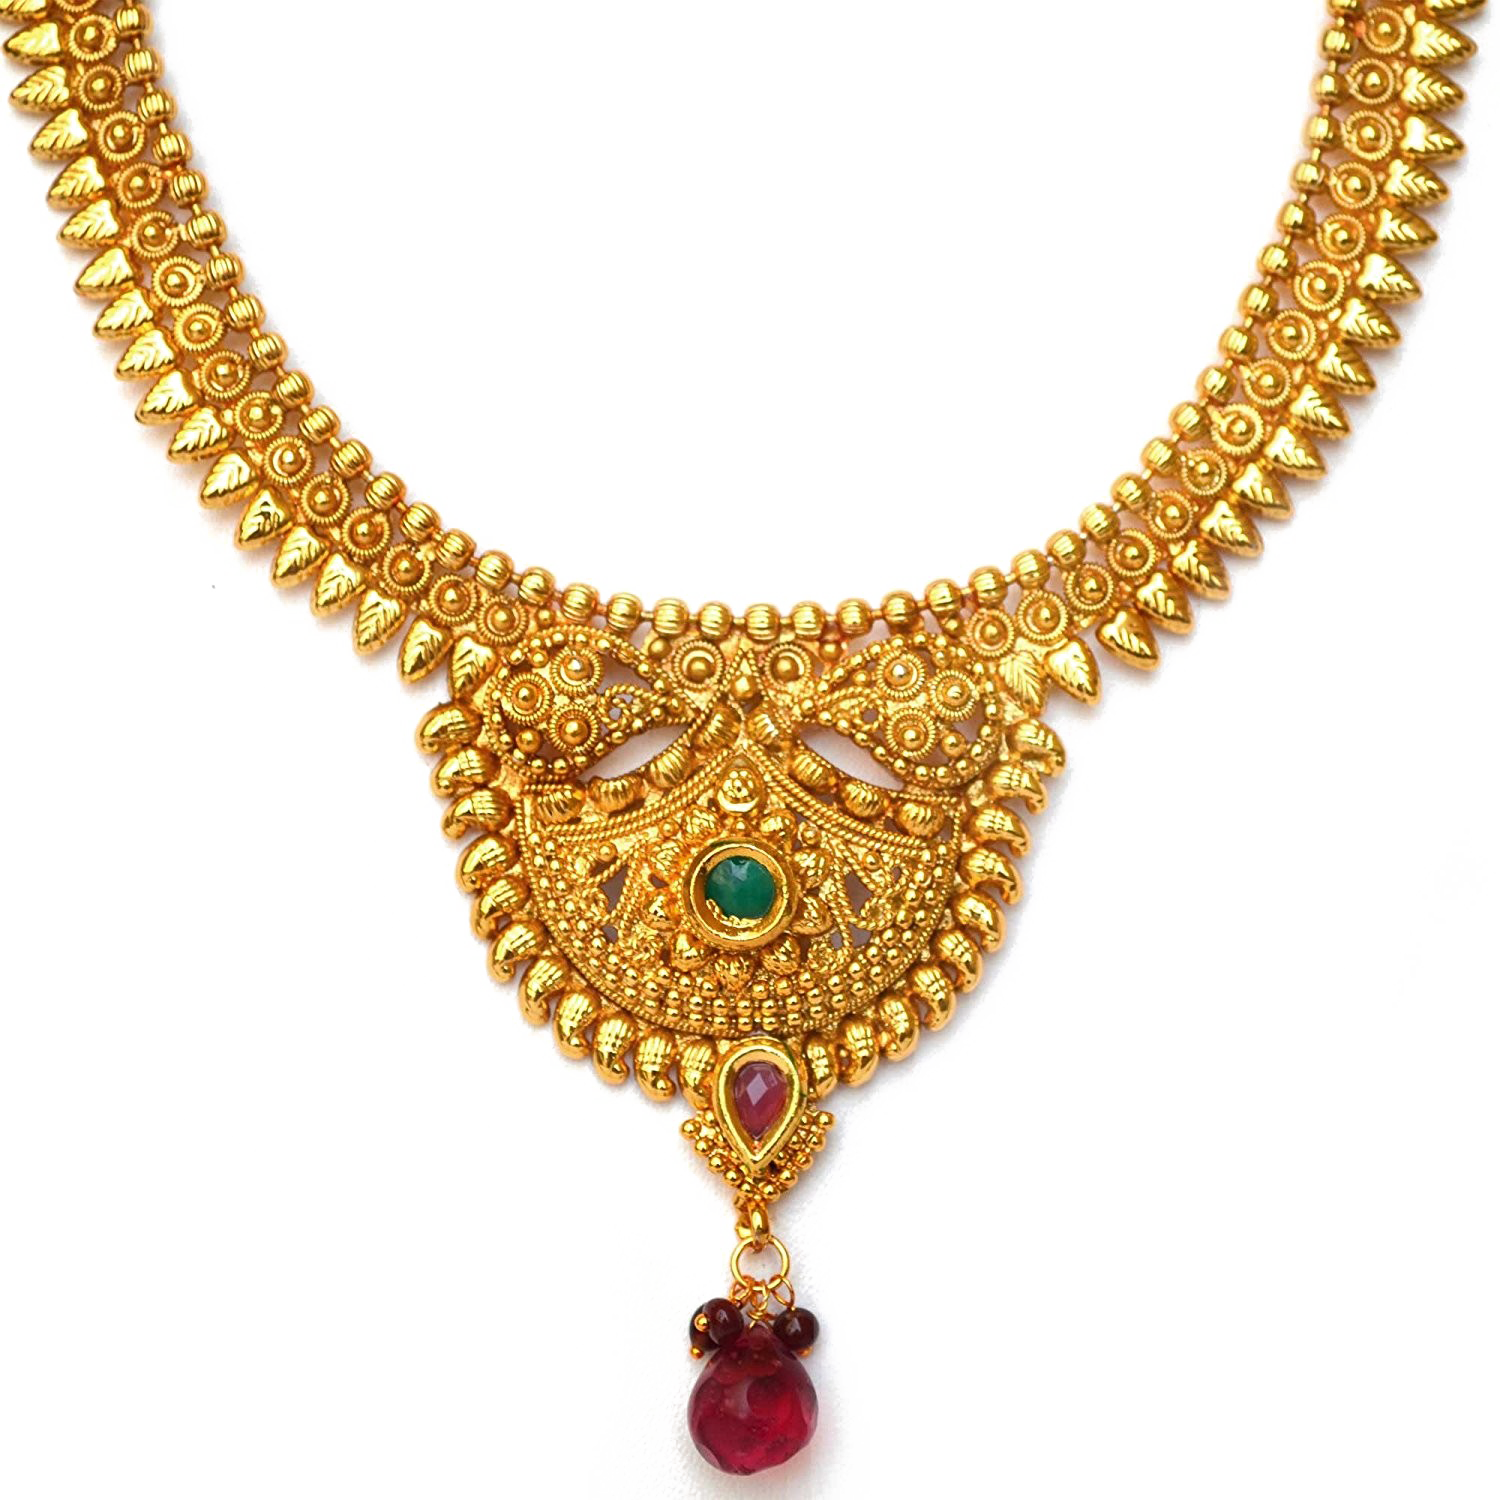 Necklace PNG Images, Jewellers Necklace Designs Pictures.